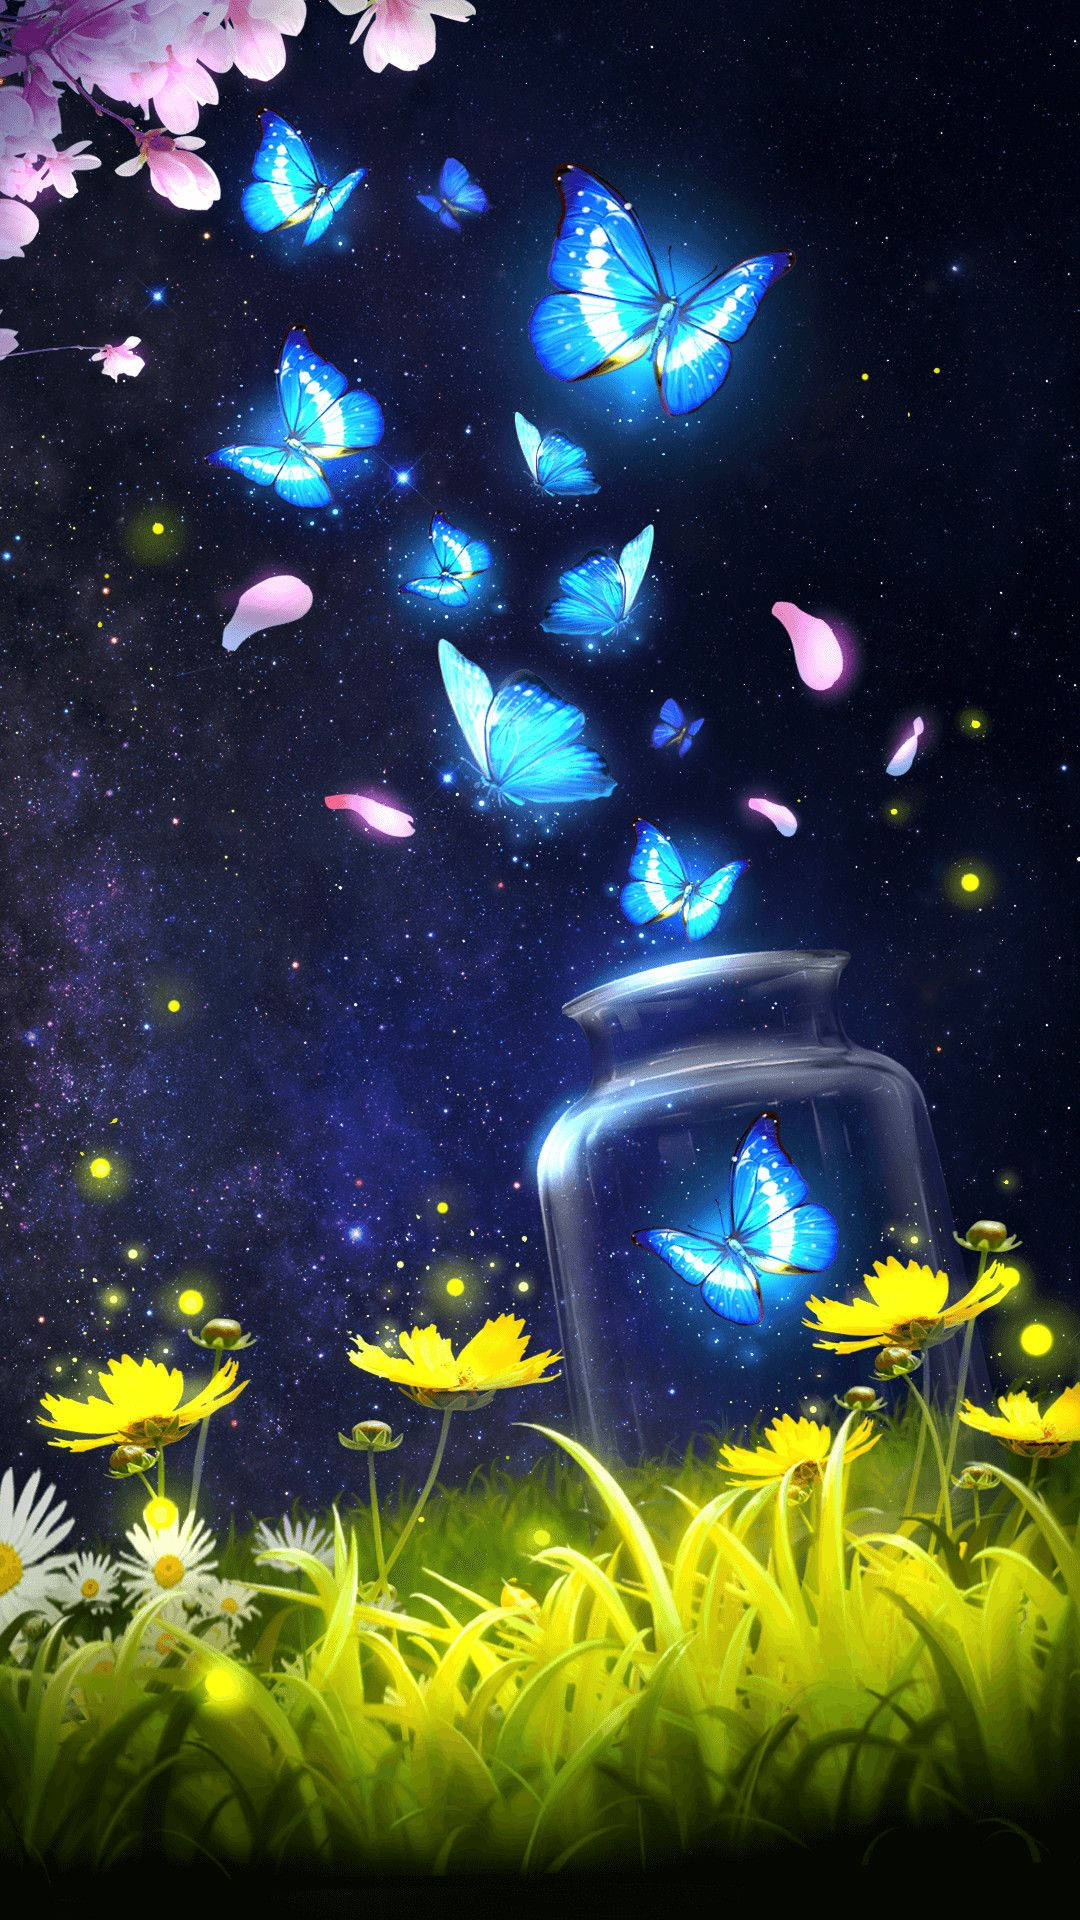 Beautiful Butterflies Animated In Mid-flight Background